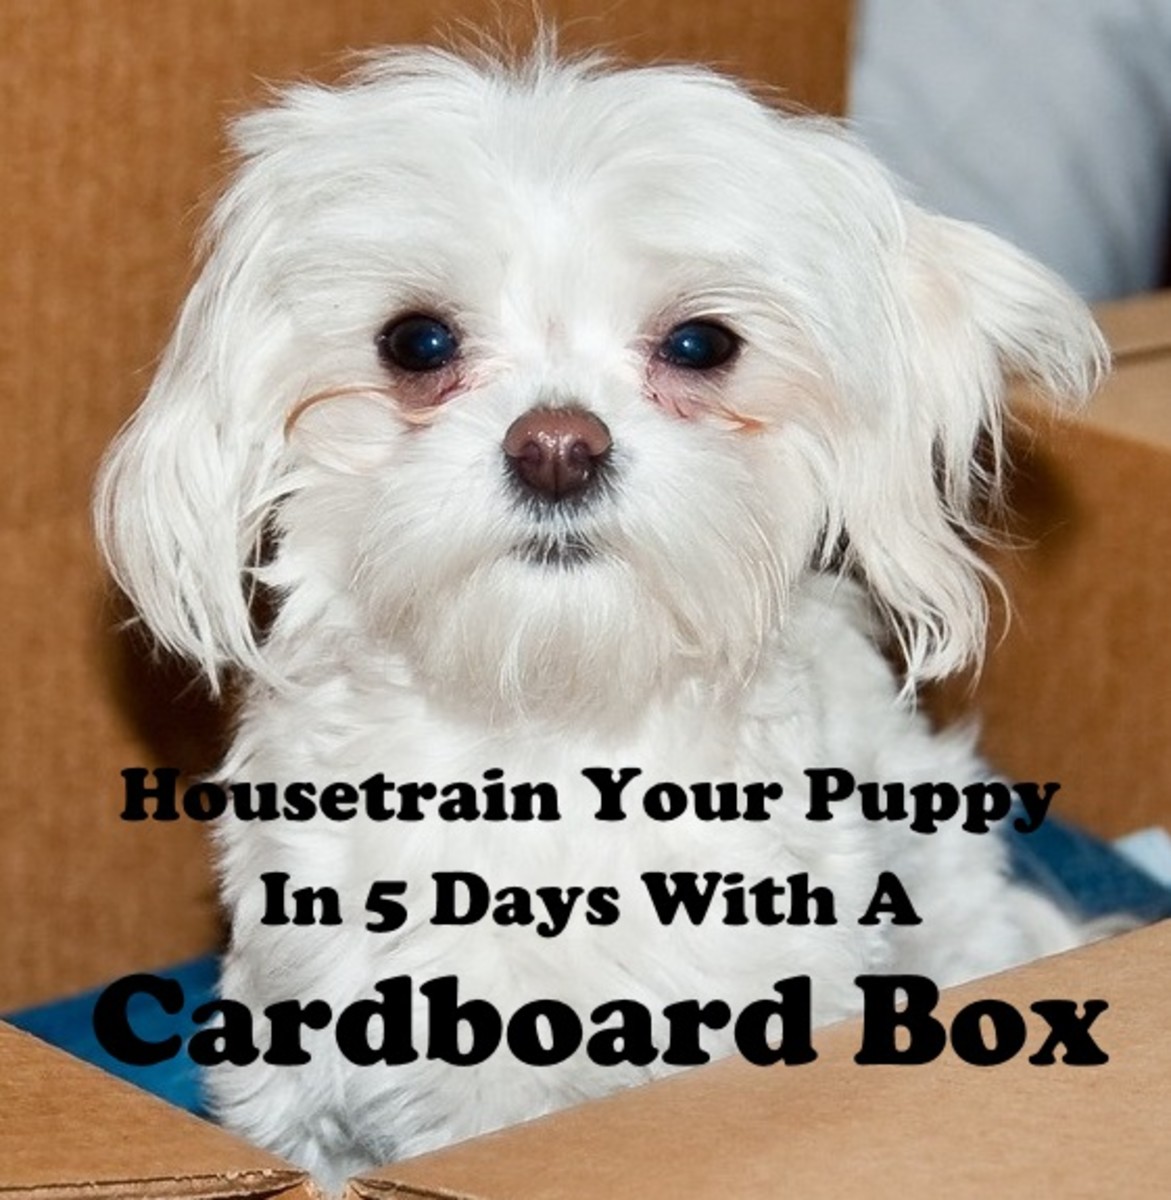 How To Housetrain A Puppy In 5 Days Using A Cardboard Box Pethelpful By Fellow Animal Lovers And Experts,Crochet Elephant Pattern